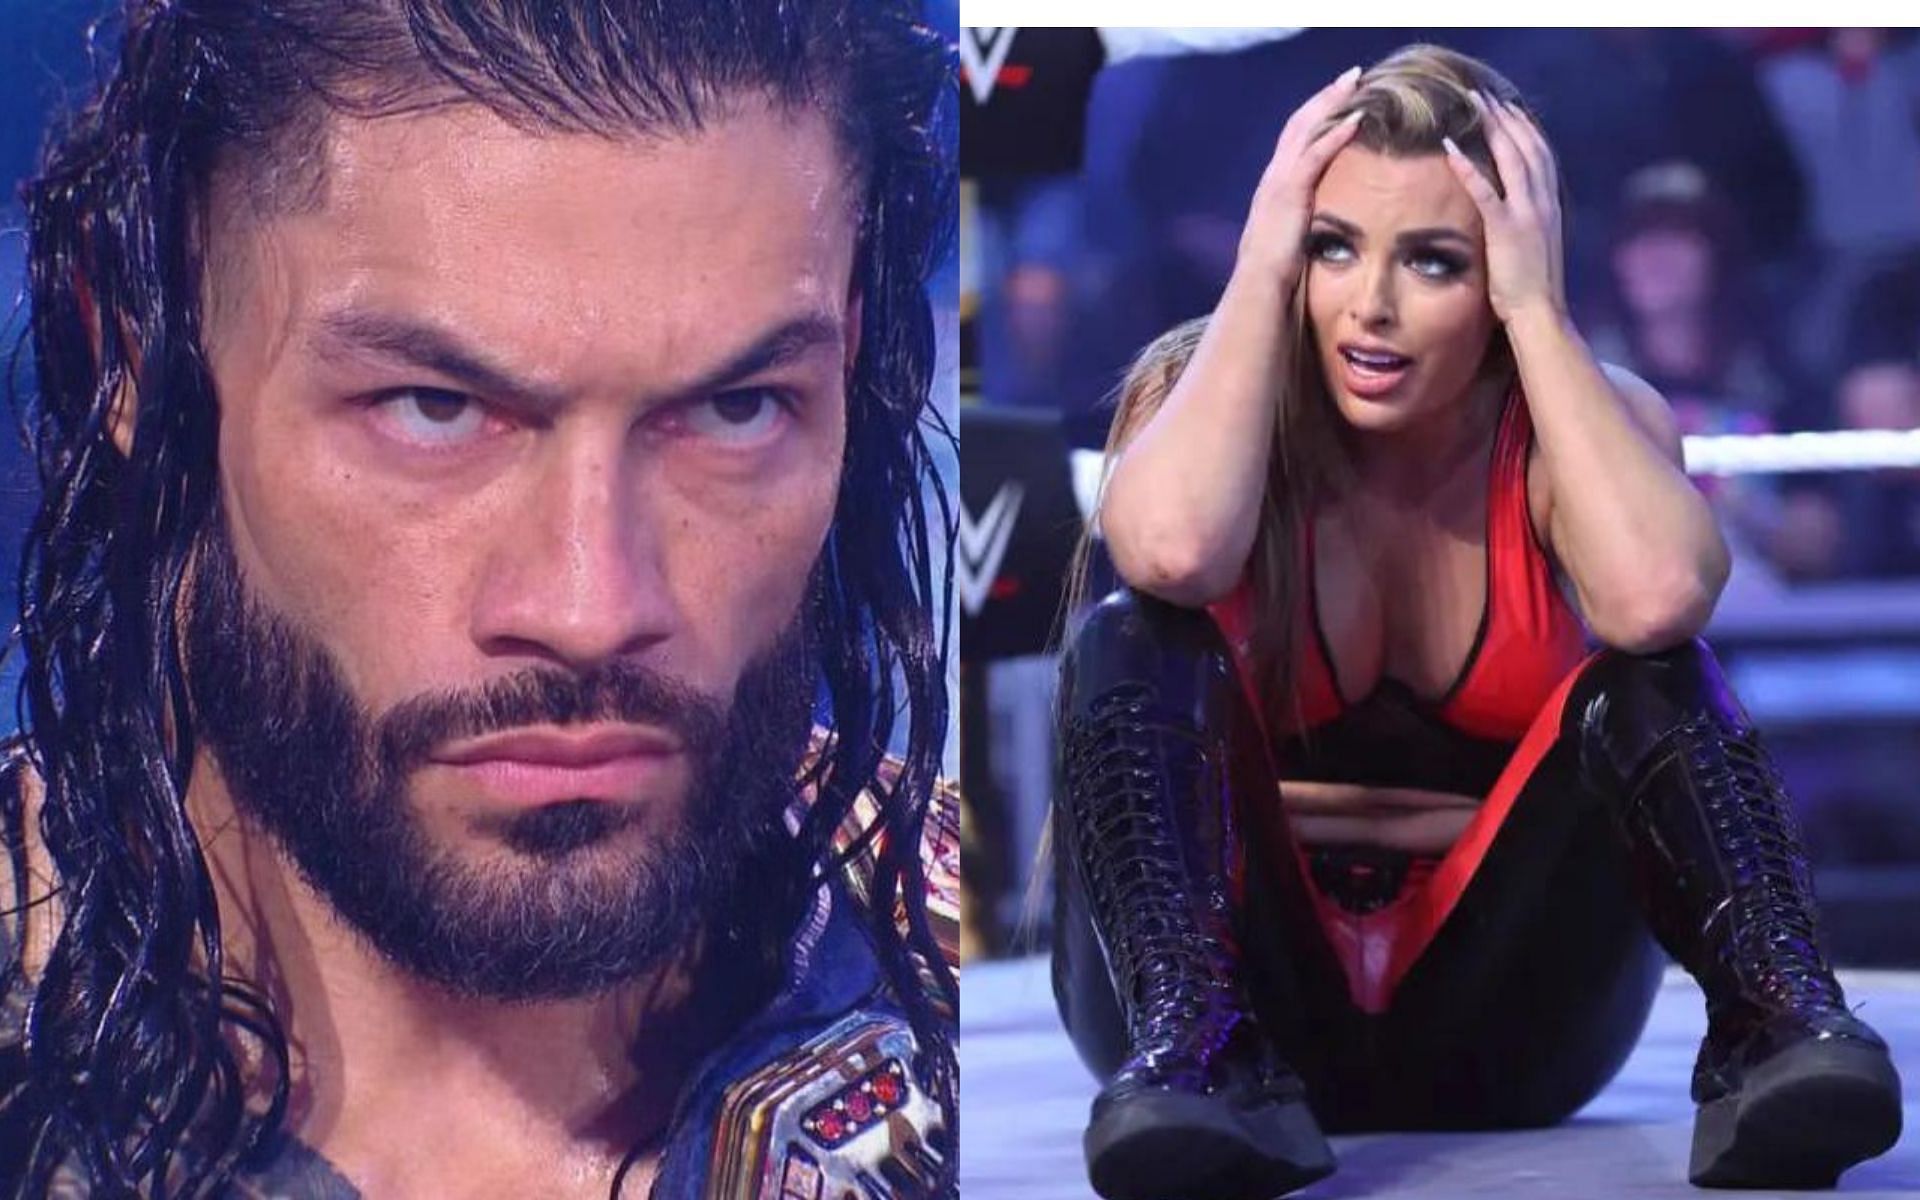 Roman Reigns and Mandy Rose dominated the WWE main roster and NXT respectively